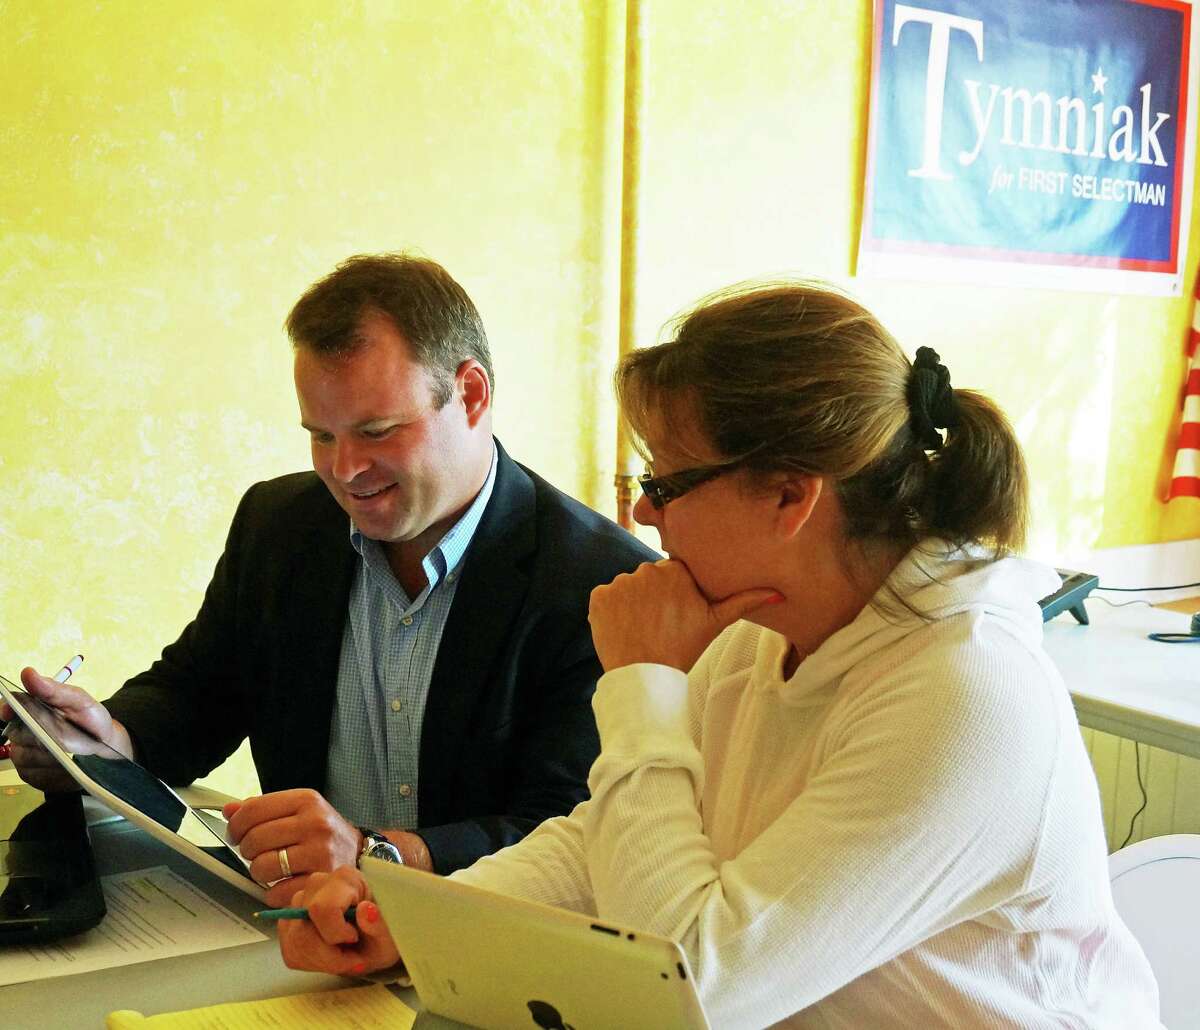 Republican first selectman candidate Chris Tymniak goes over some plans with running mate Laurie McArdle at their Unquowa Road headquarters.